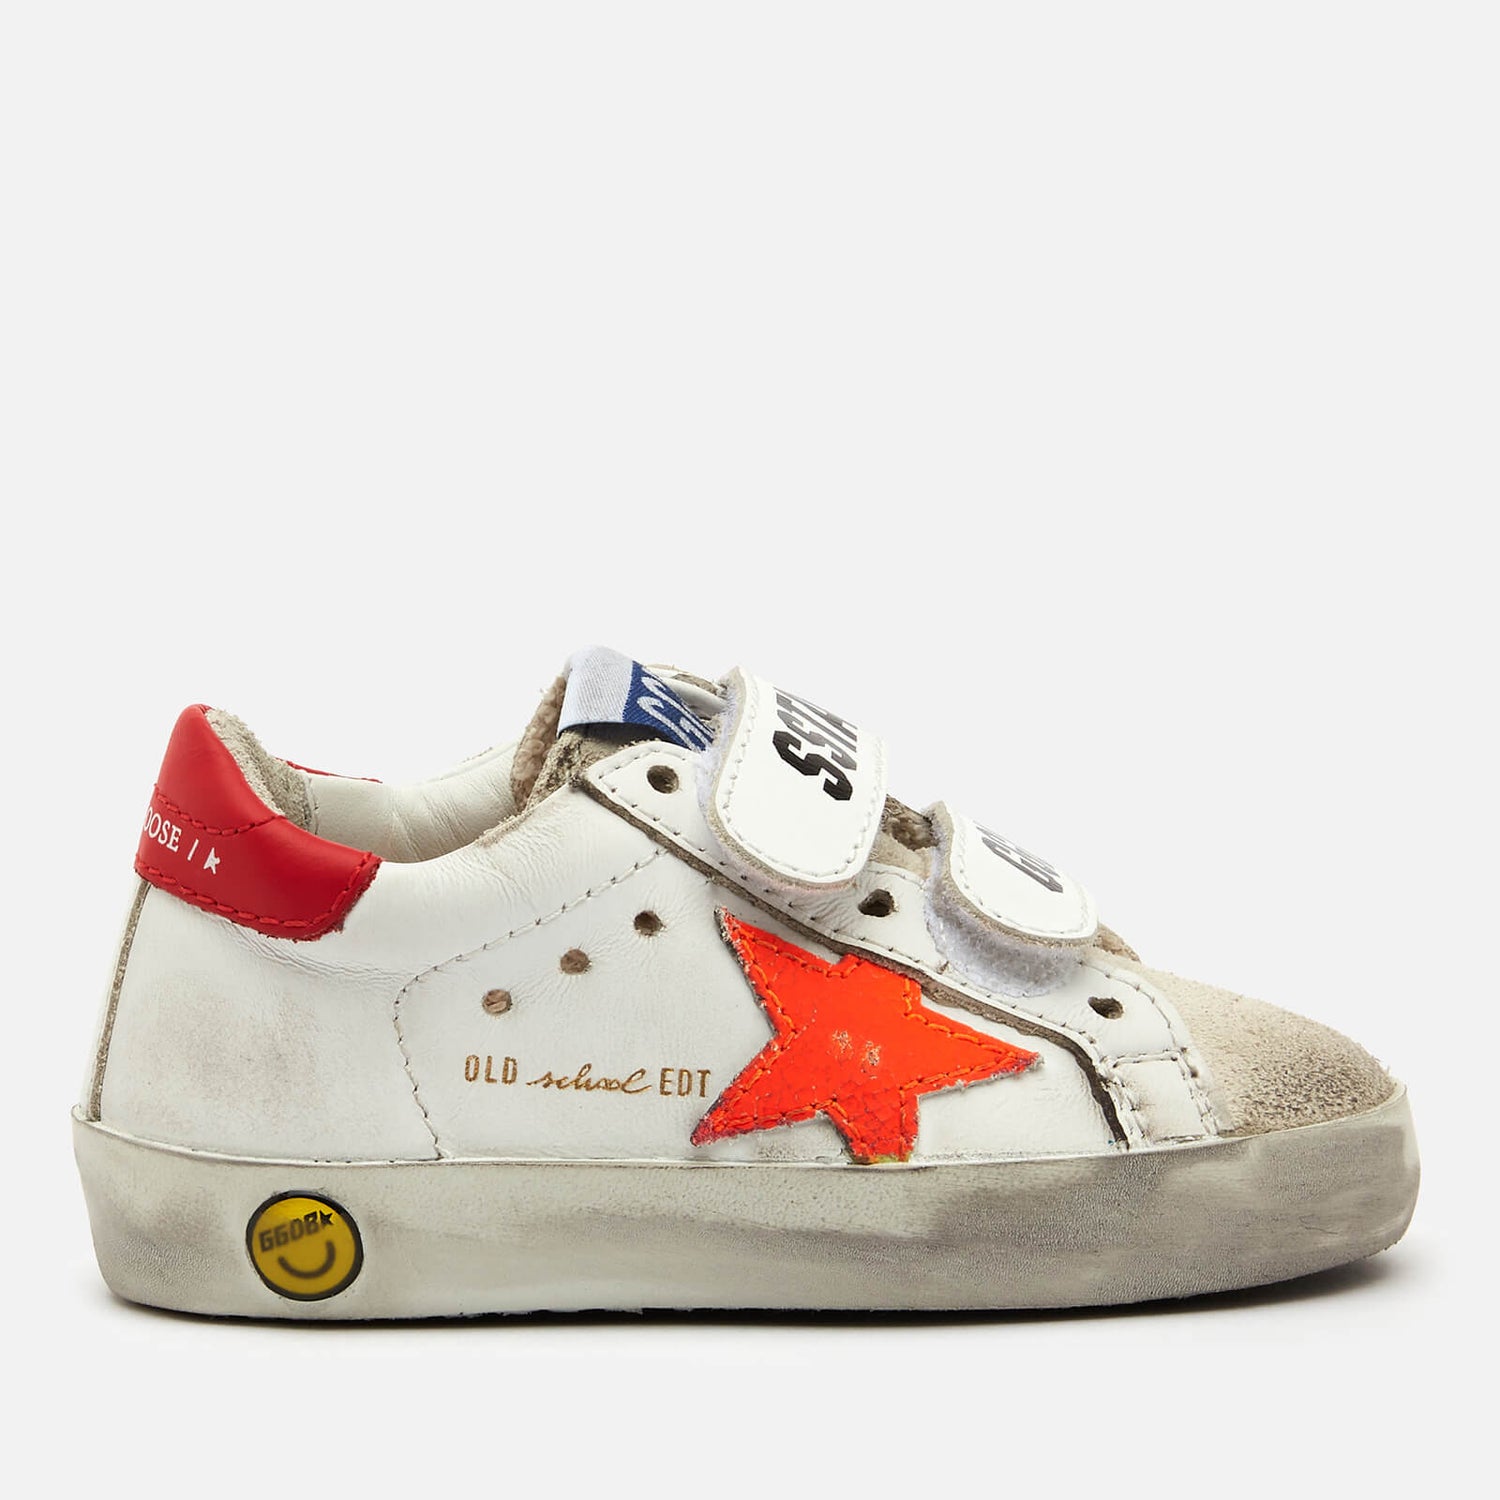 Golden Goose Toddlers' Old School Leather Trainers - White/Ice/Orange Fluo/Cherry Red - UK 3 Toddler